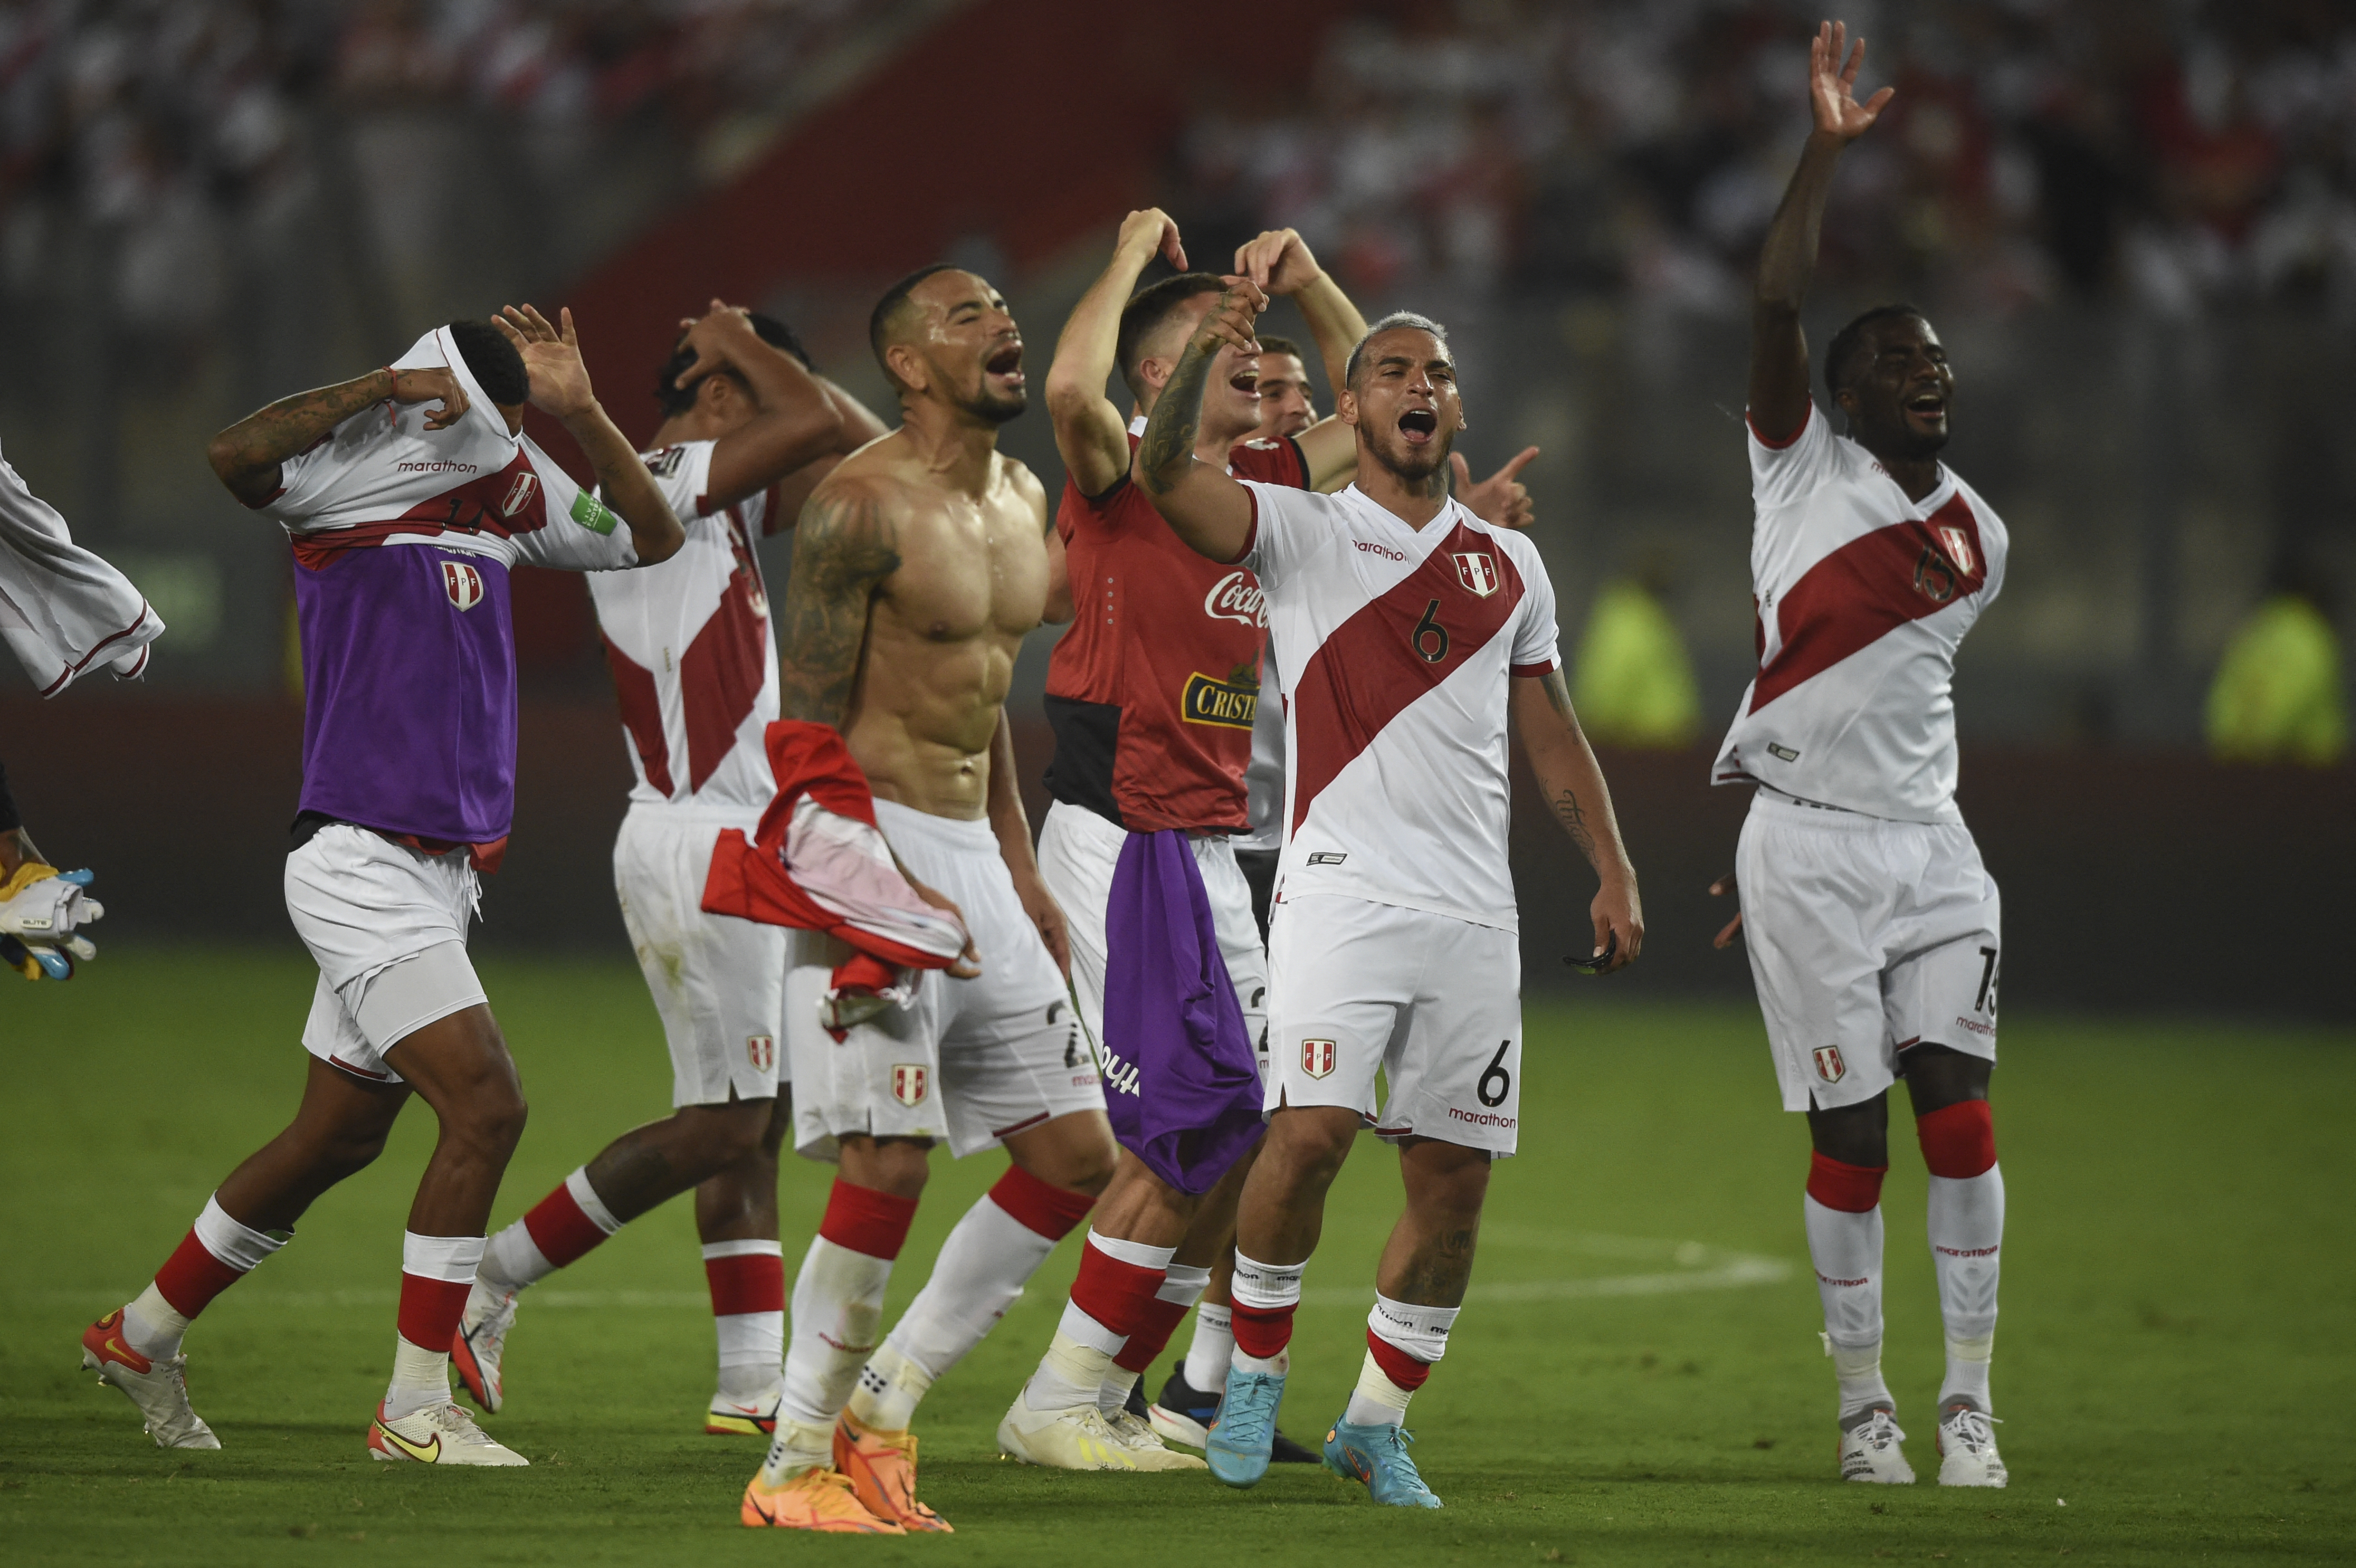 Peruvian players celebrate after defeating Paraguay in their South American qualification football match for the FIFA World Cup Qatar 2022 at the National Stadium in Lima on March 29, 2022. - Peru will play the intercontinental playoff match in June against Australia or the United Arab Emirates. (Photo by ERNESTO BENAVIDES / AFP)